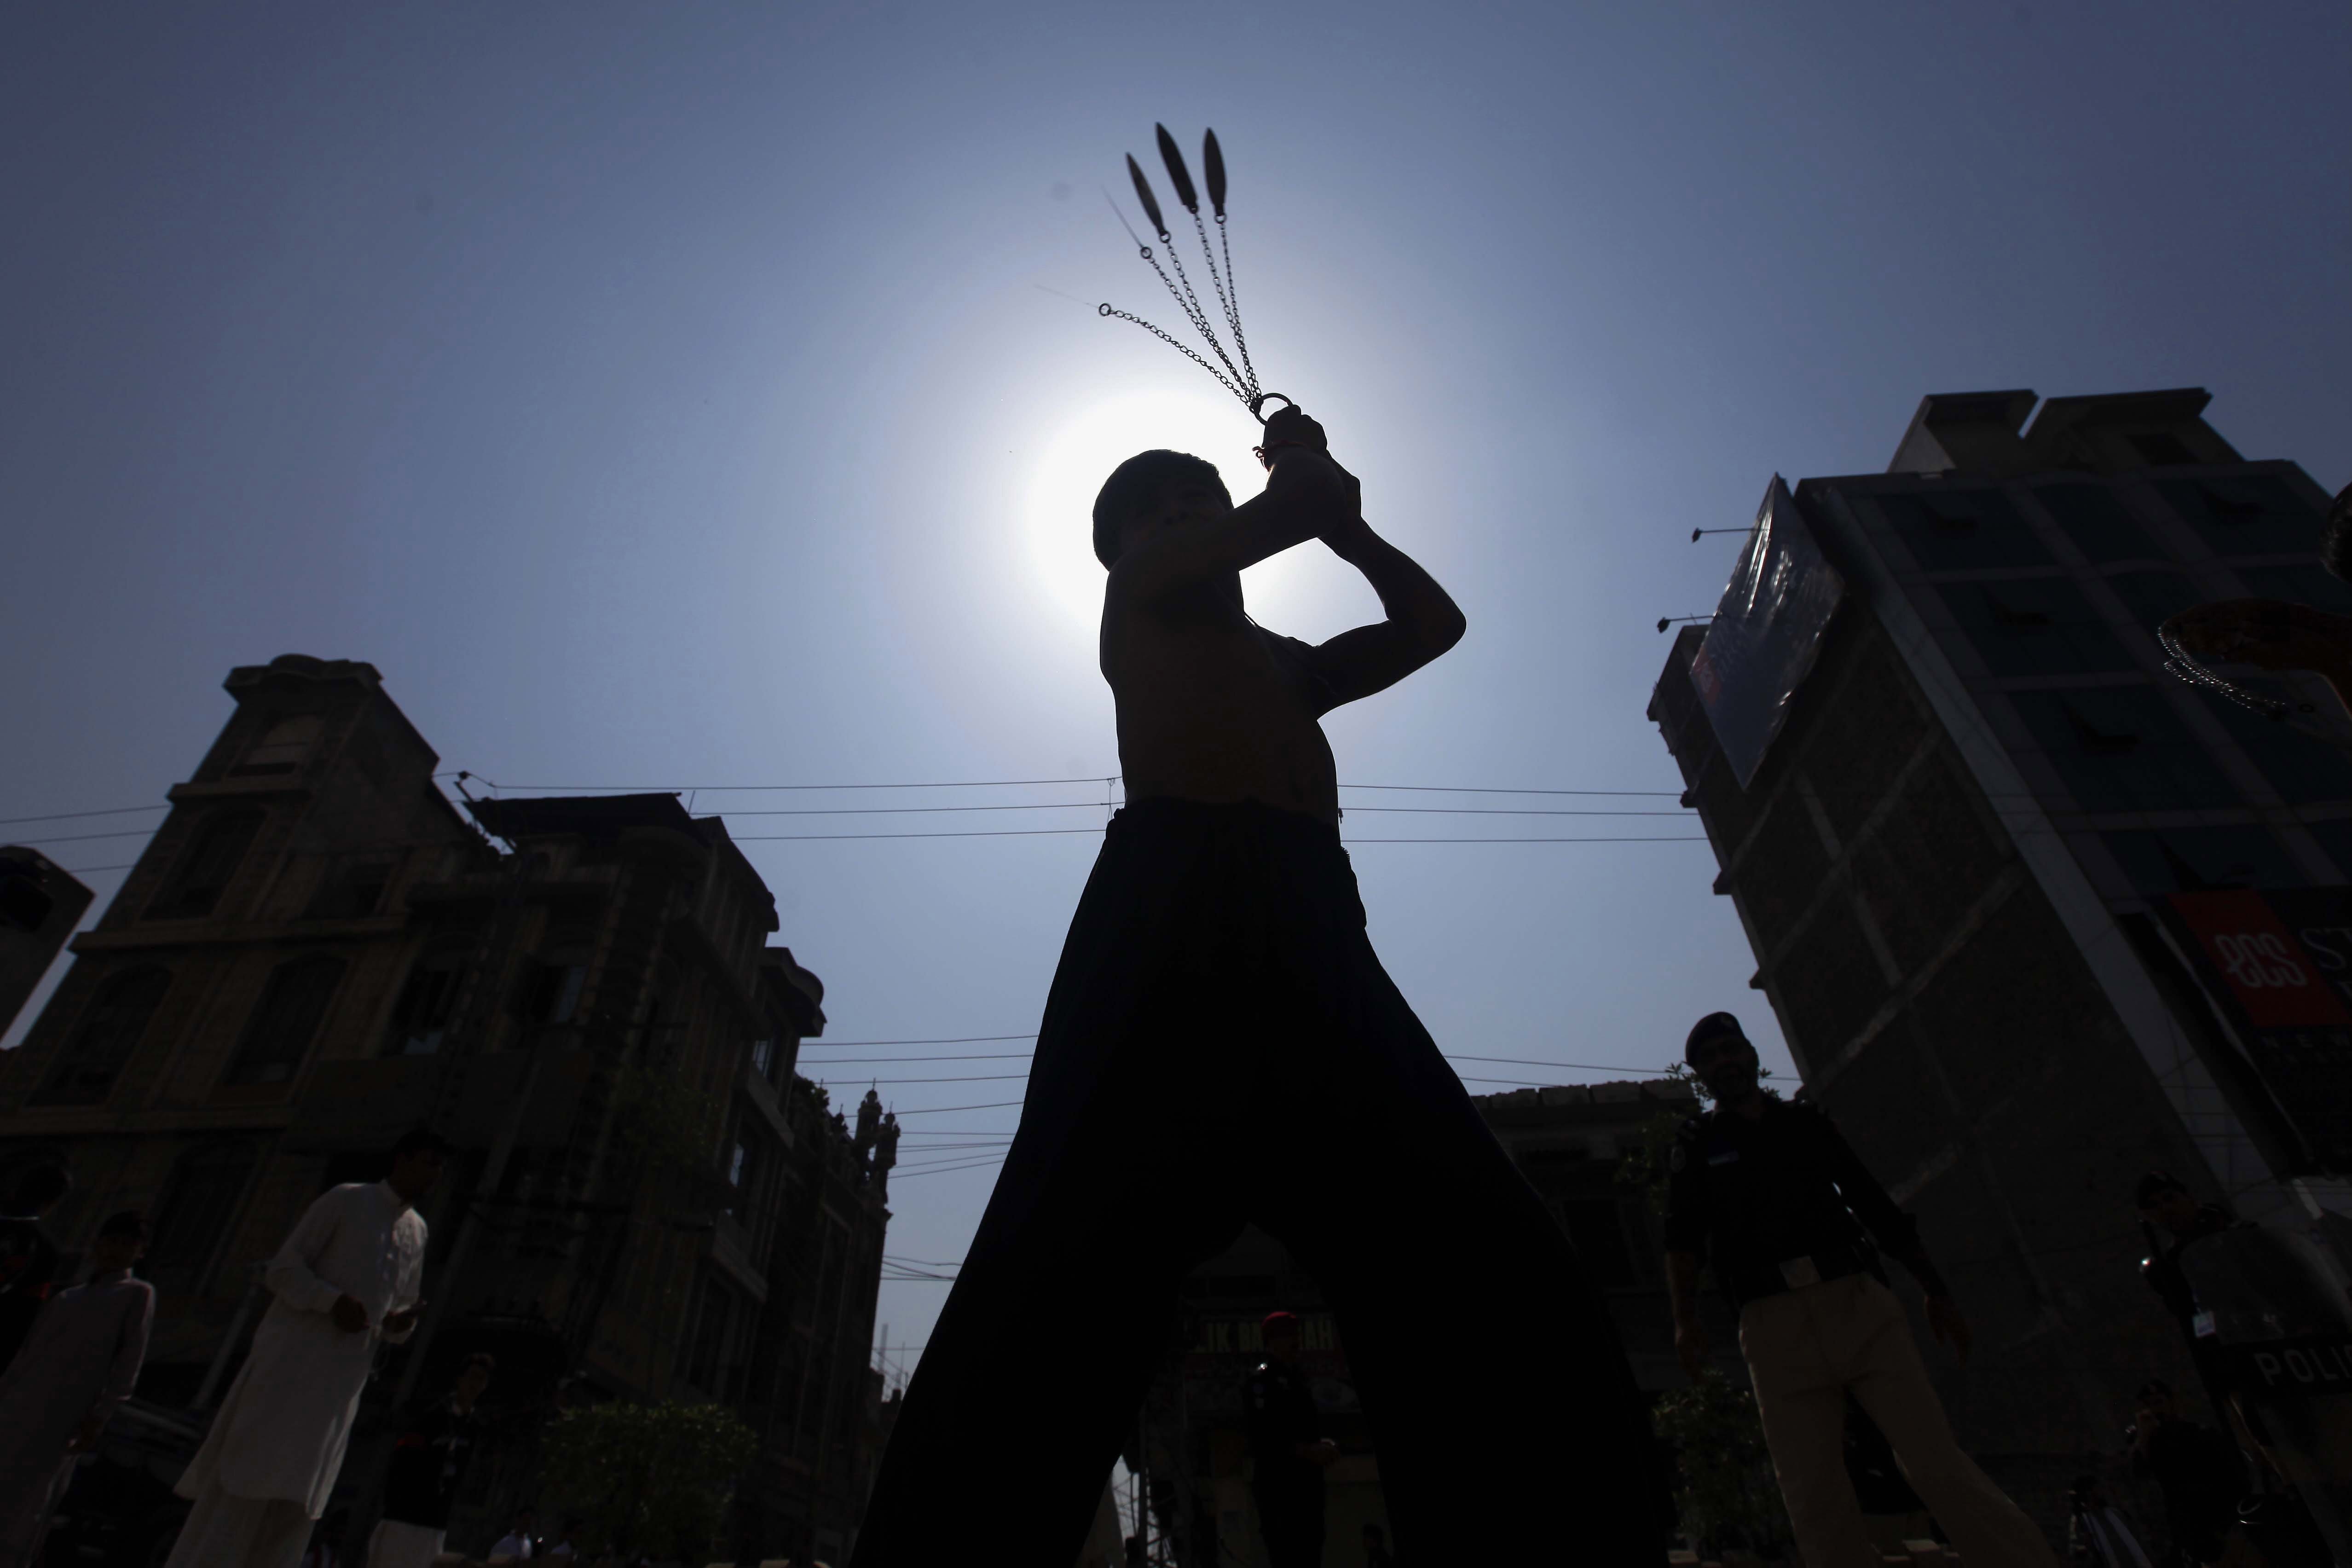 A Pakistani Shiite Muslim boy is silhouetted against the sky as he flagellates himself with chains and blades a mourning procession on the sacred month of Muharram, the first month of the Islamic Calendar, in Peshawar, Pakistan.